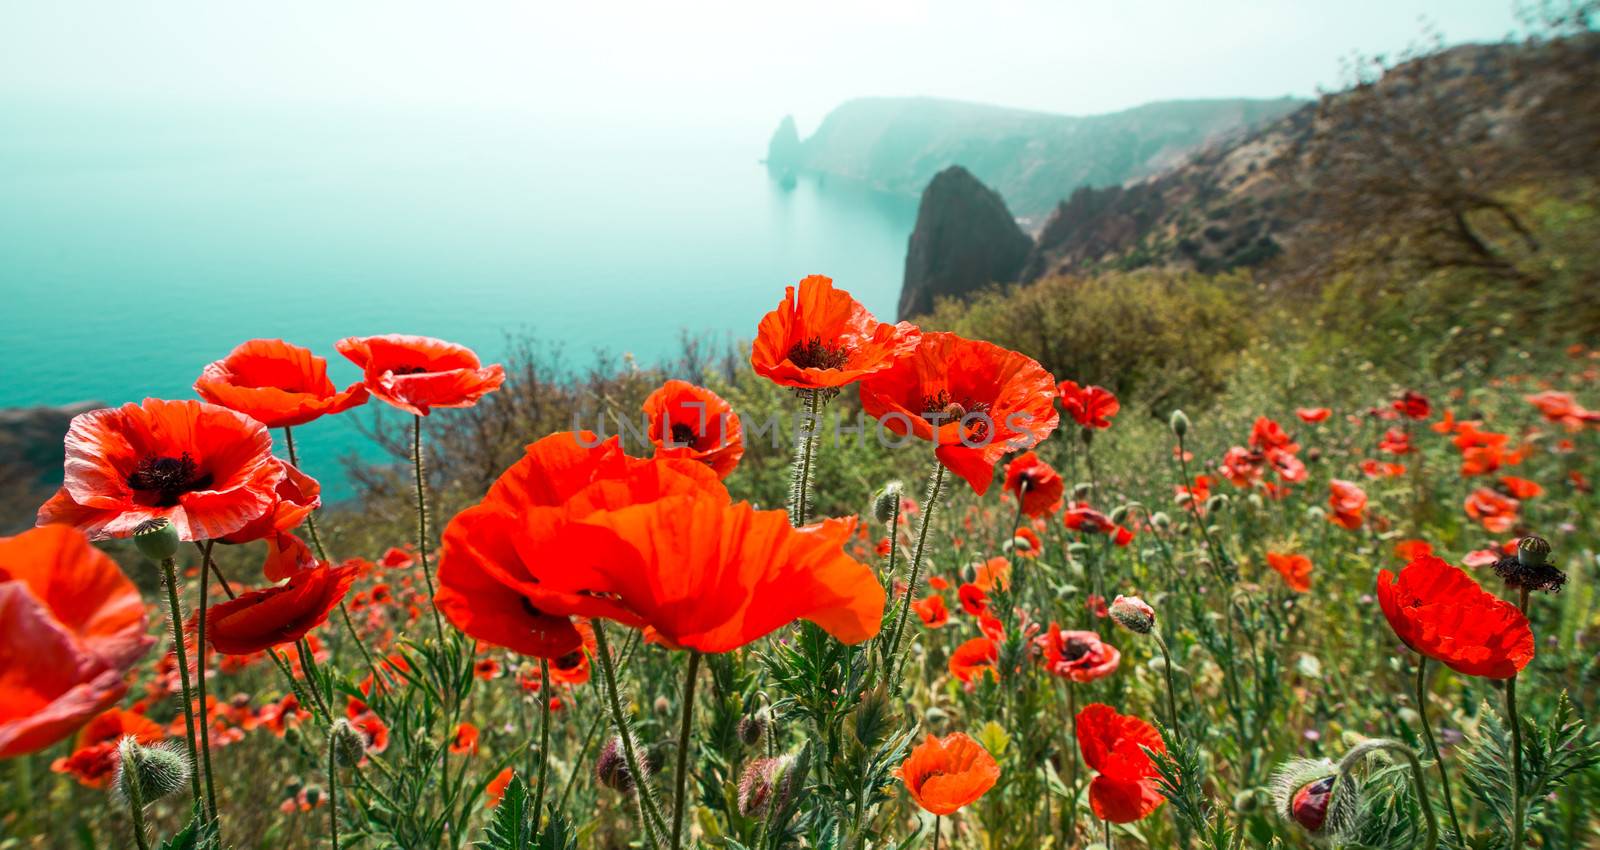 garden with poppy flowers against mountain and sea